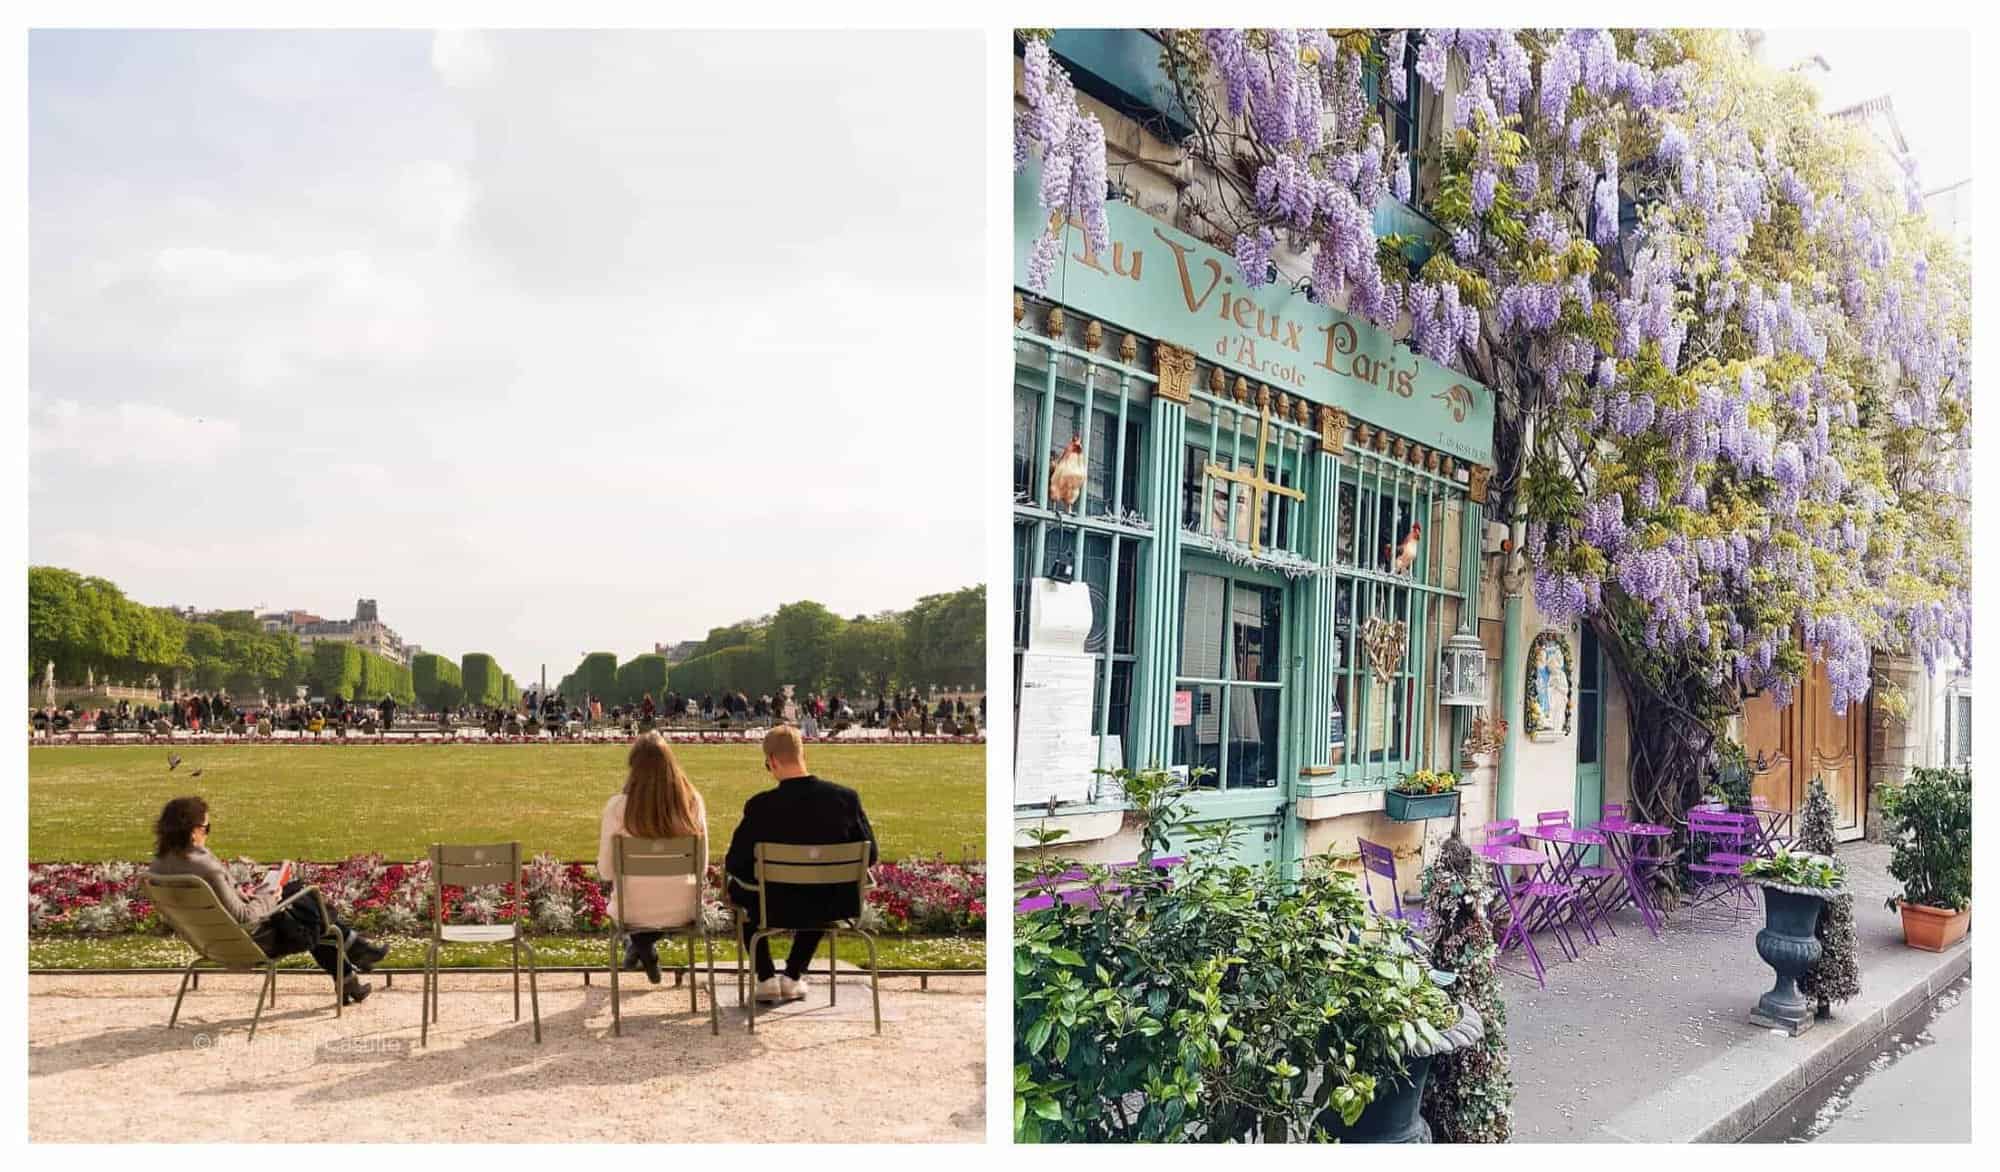 Left: 3 people sitting in green chairs in a park. Right: A shop with blue decors covered in purple wisterias.